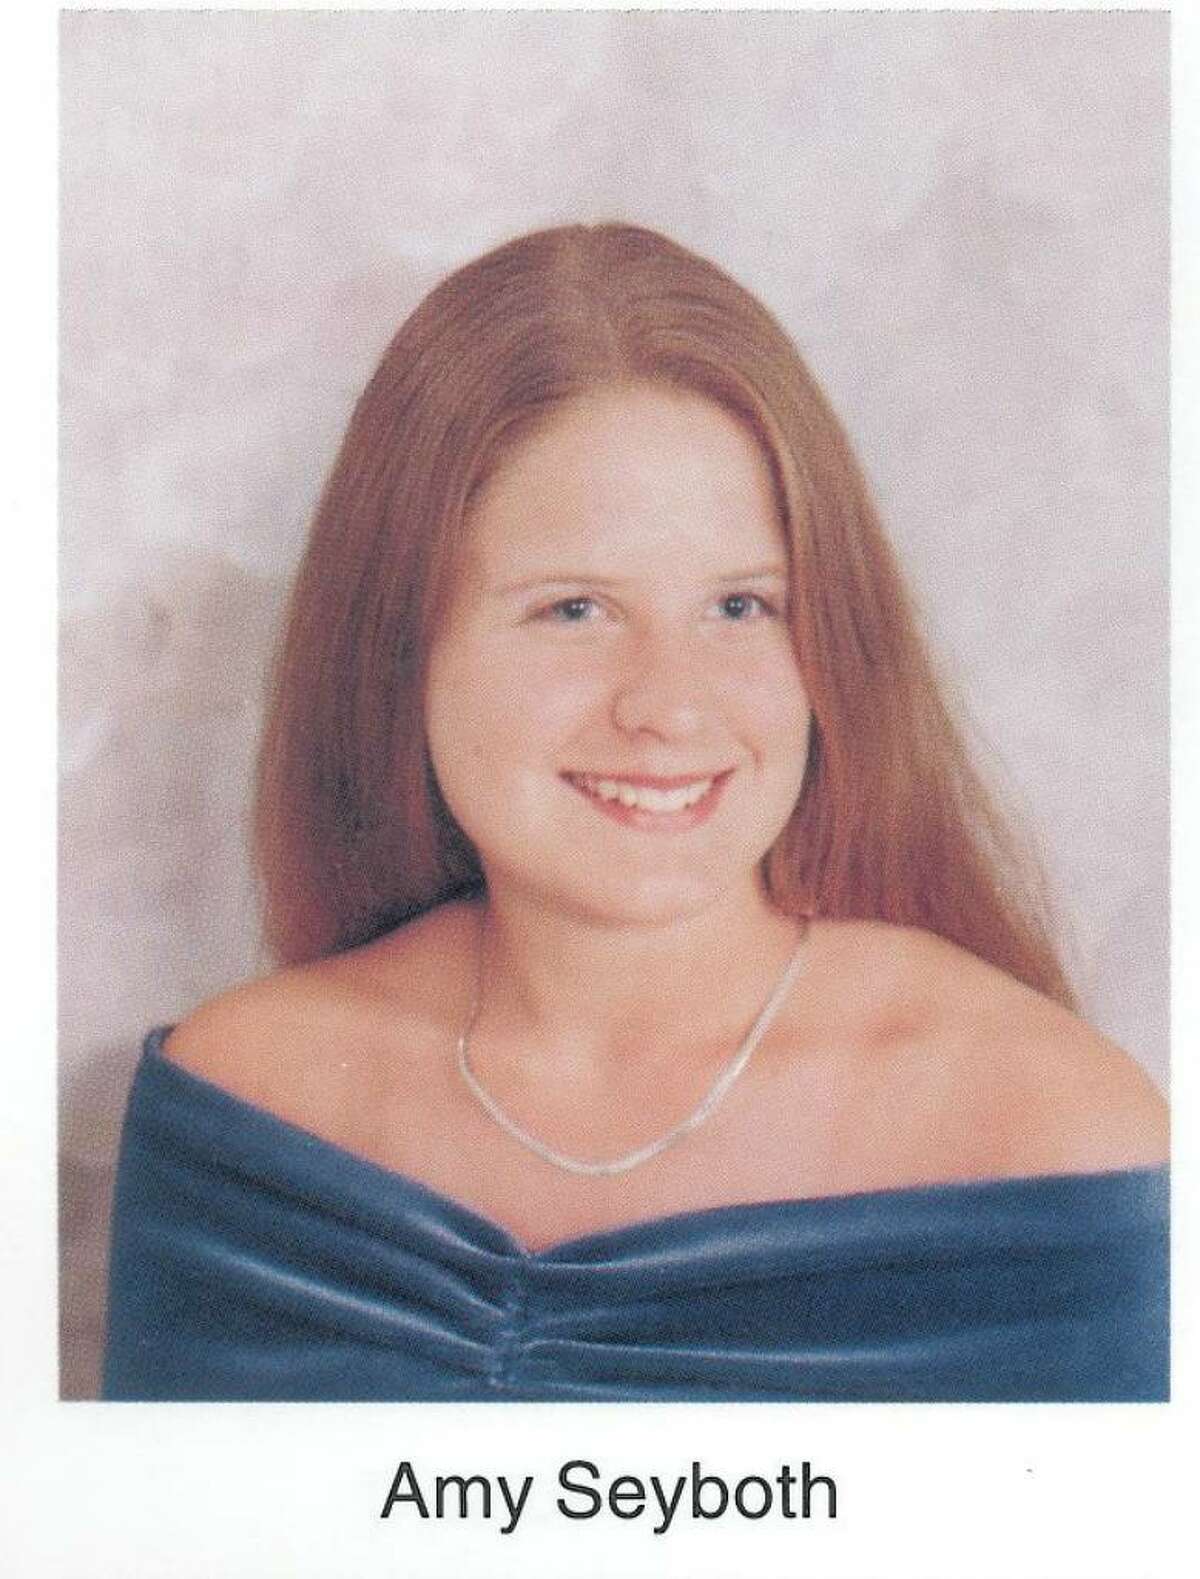 Amy Seyboth Tirador appears in her 1998 Colonie Central High School senior picture. The Army staff sergeant died in Iraq on Nov.4.